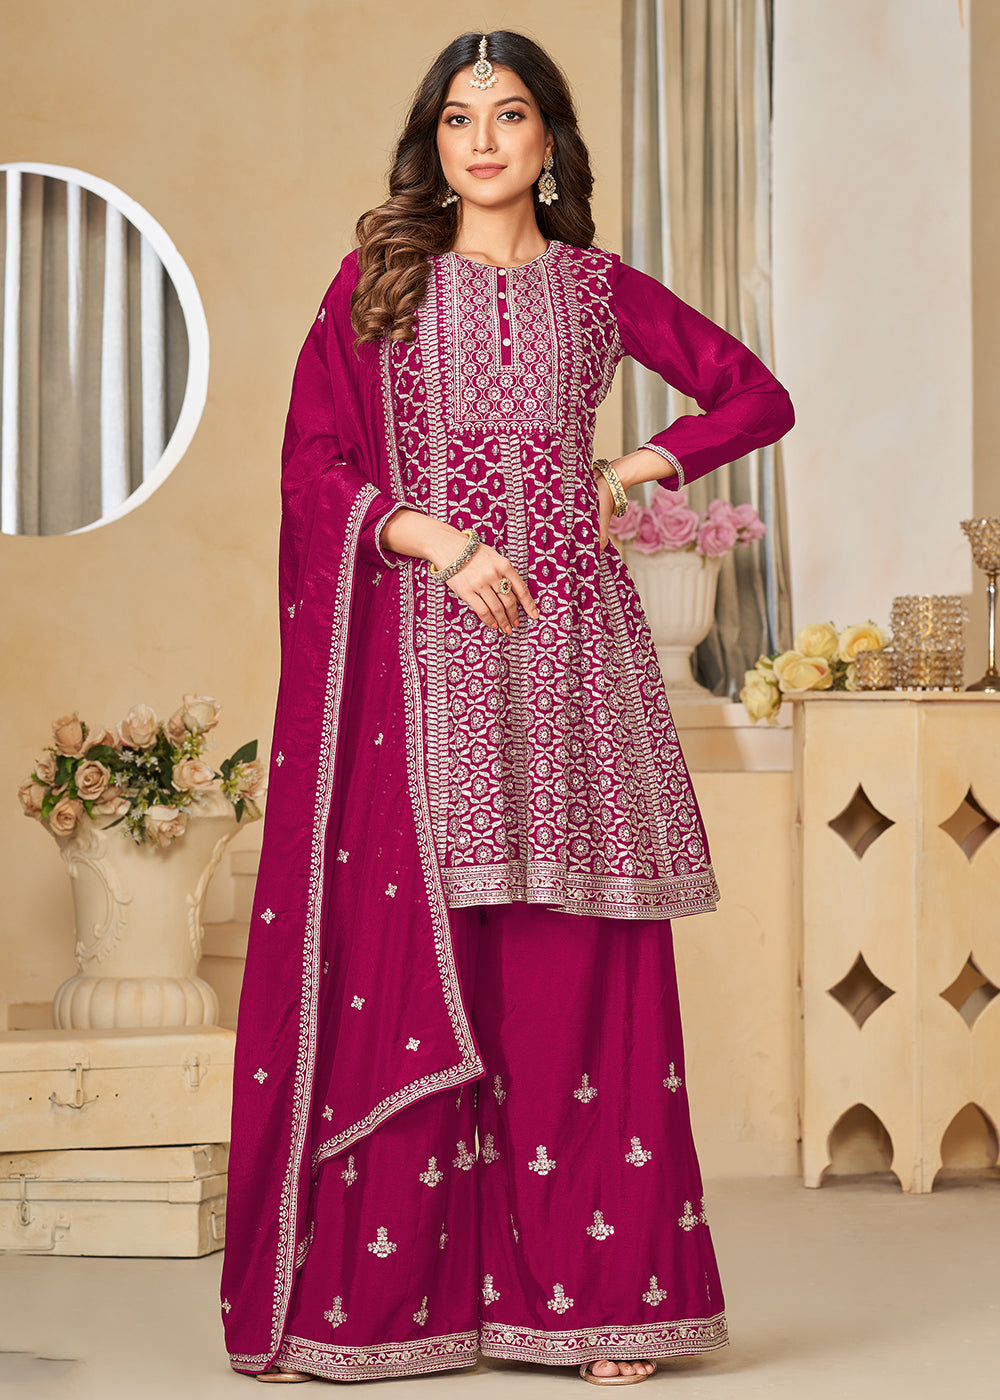 Buy Now Chinnon Rani Pink Embroidered Palazzo Salwar Suit Online in USA, UK, Canada, Germany, Australia & Worldwide at Empress Clothing. 